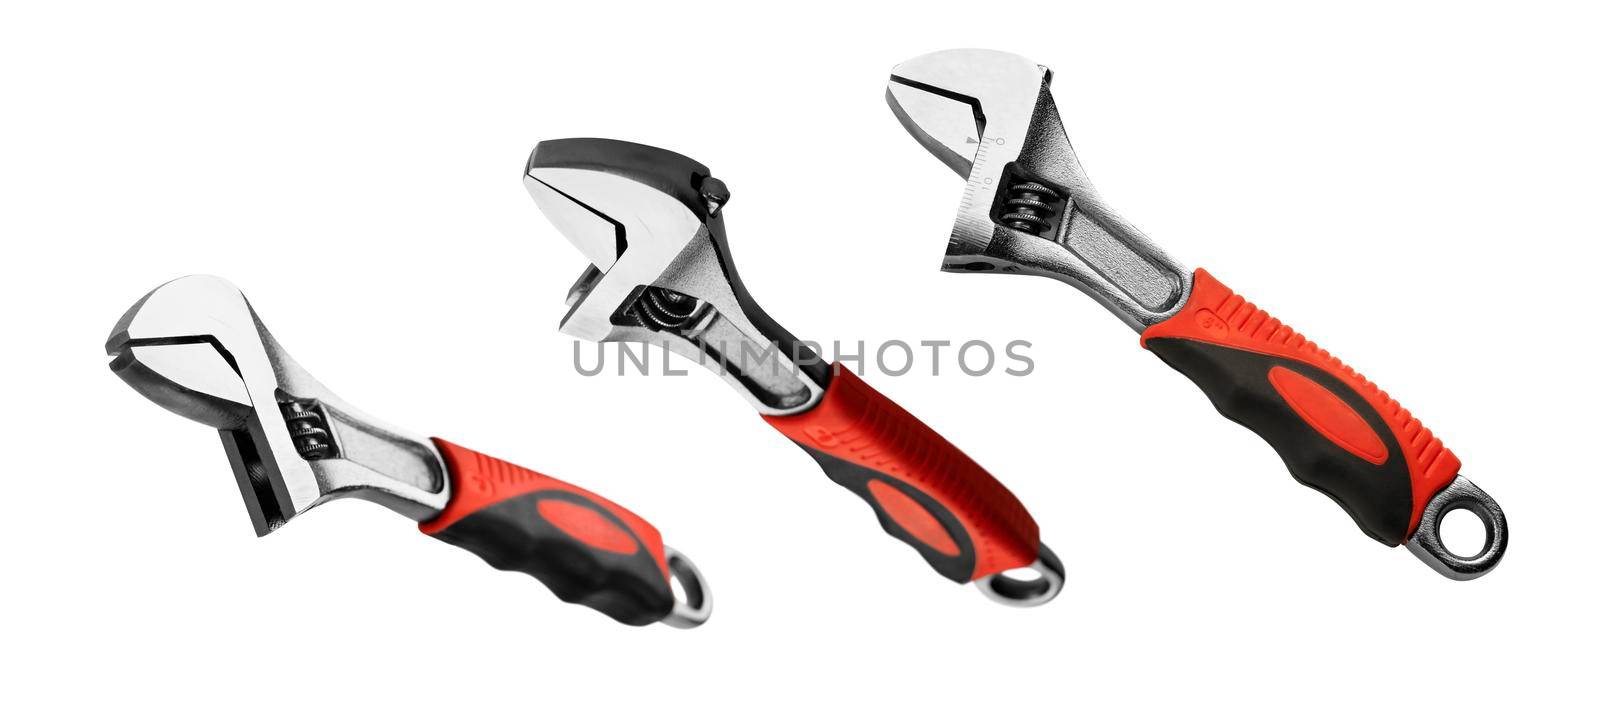 Adjustable wrench in different angles on a white background by butenkow